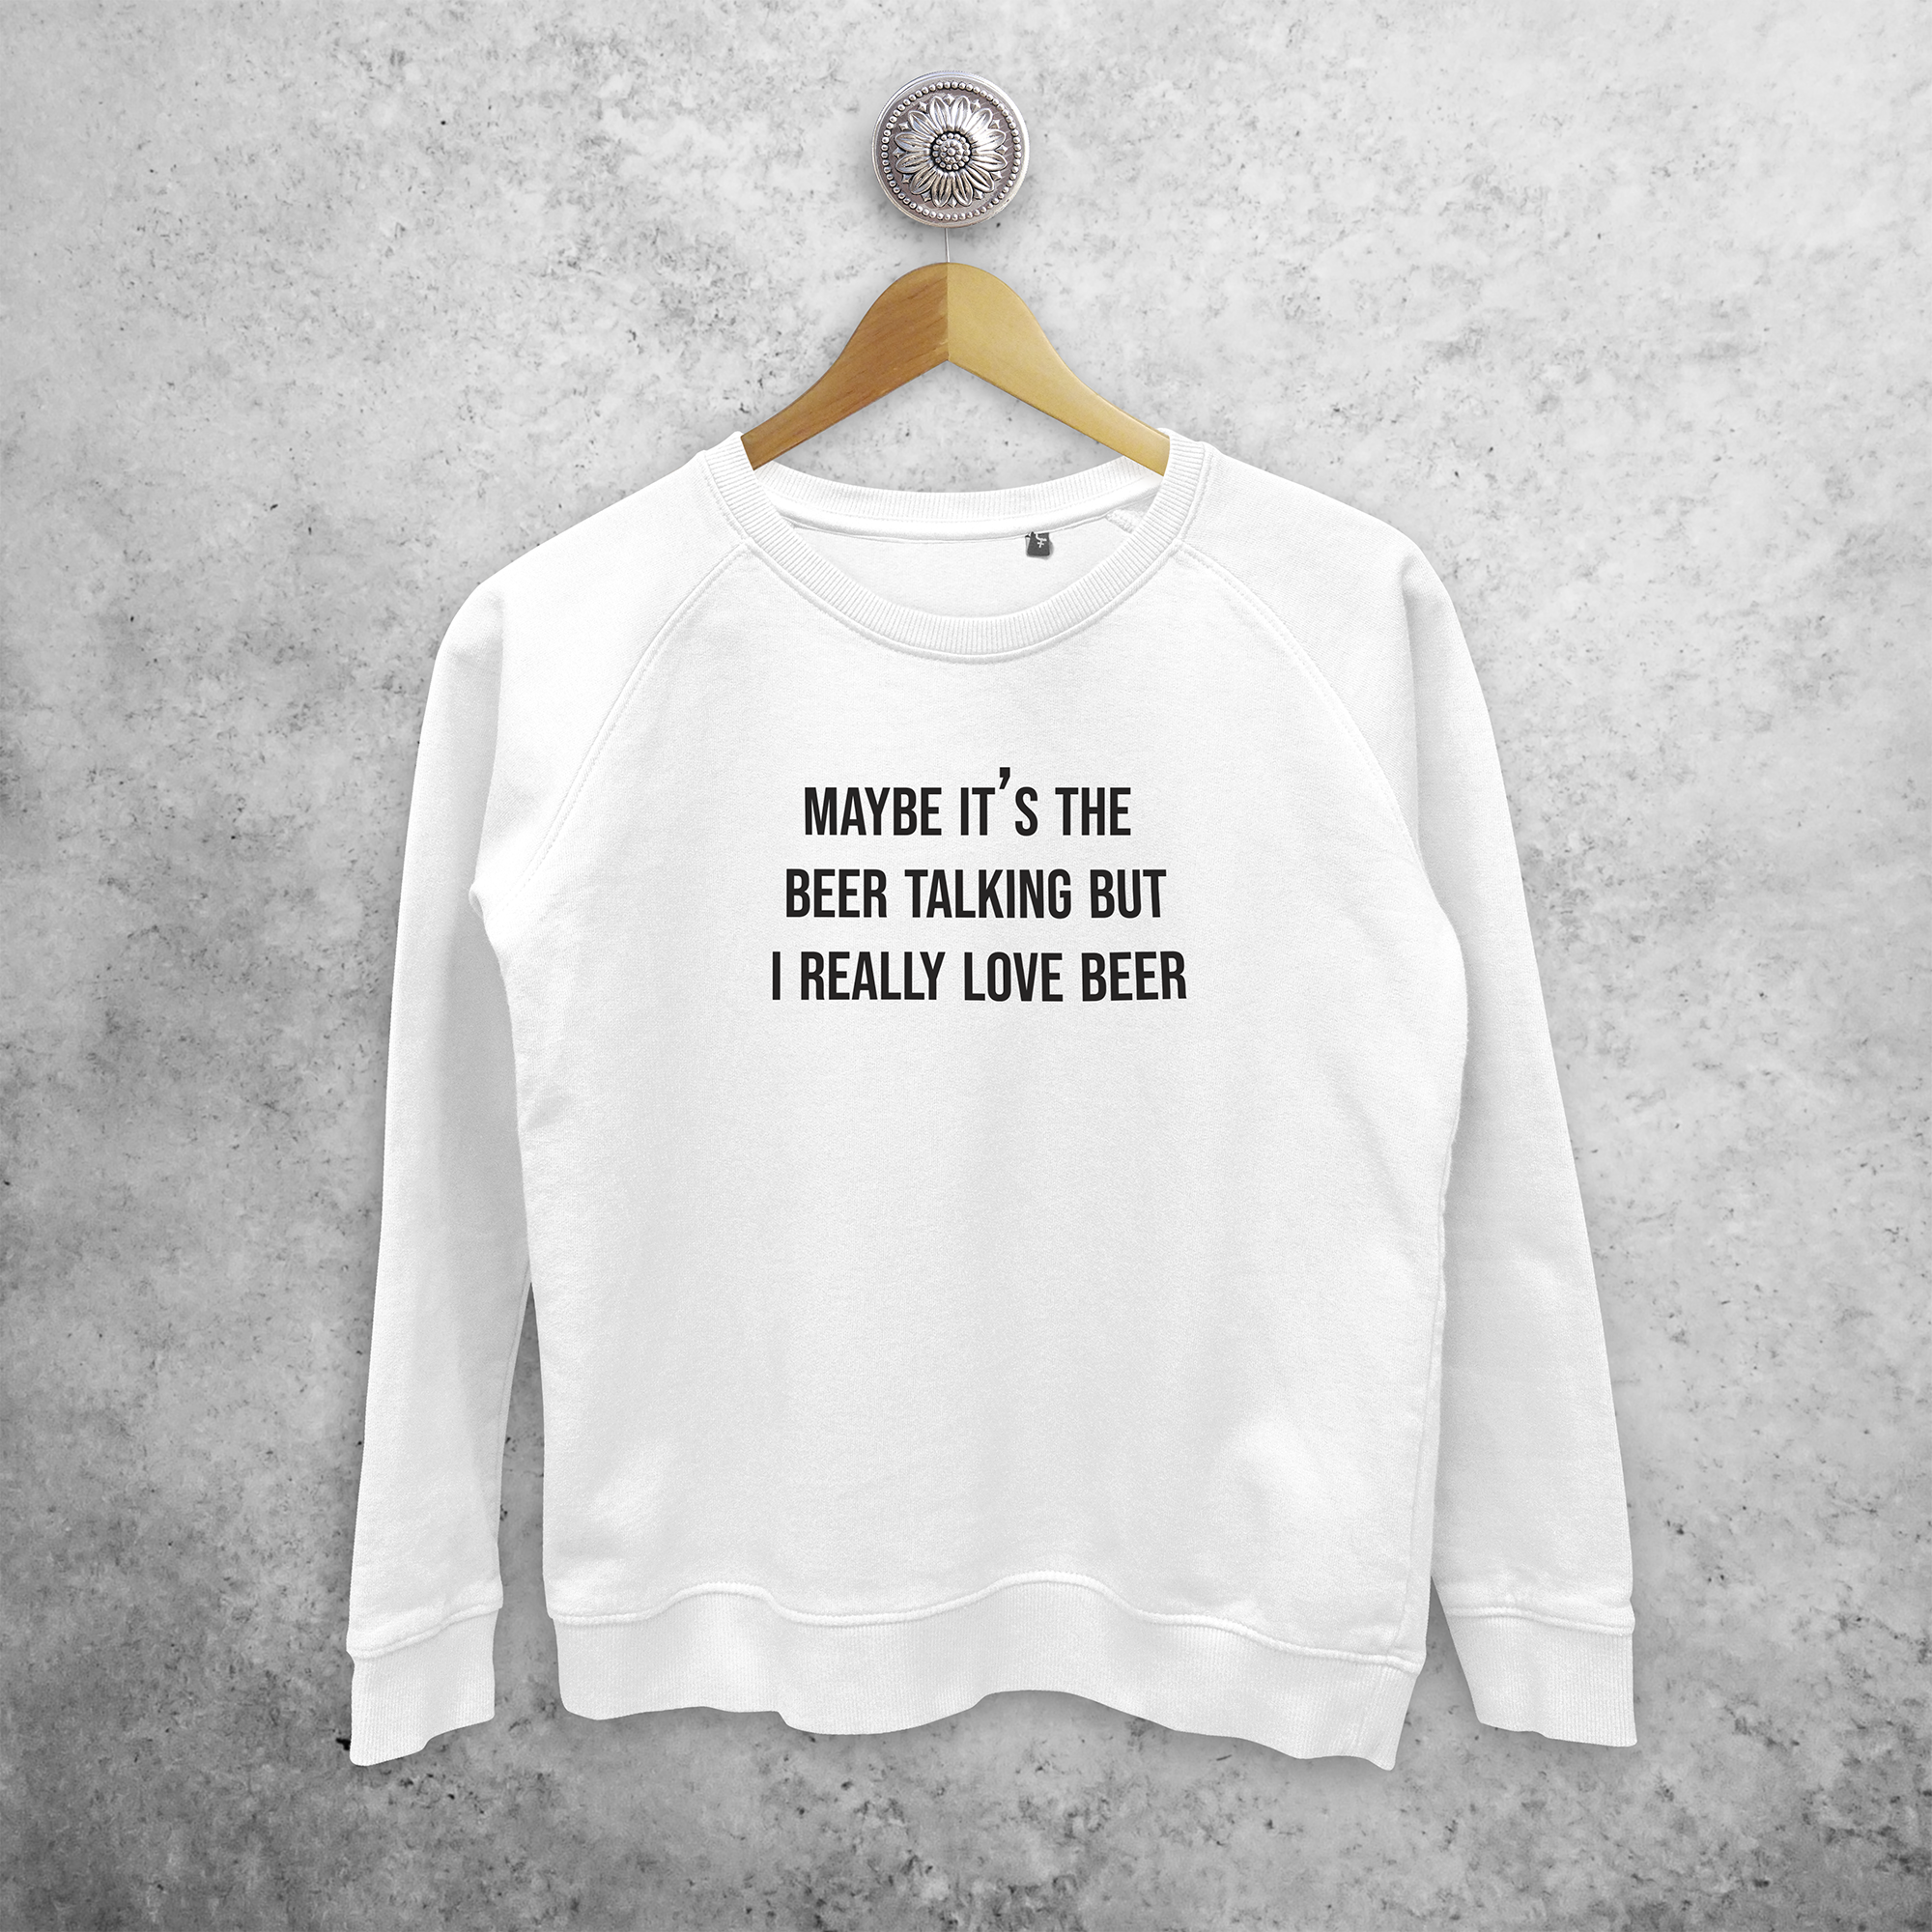 'Maybe it's the beer talking but I really love beer' sweater